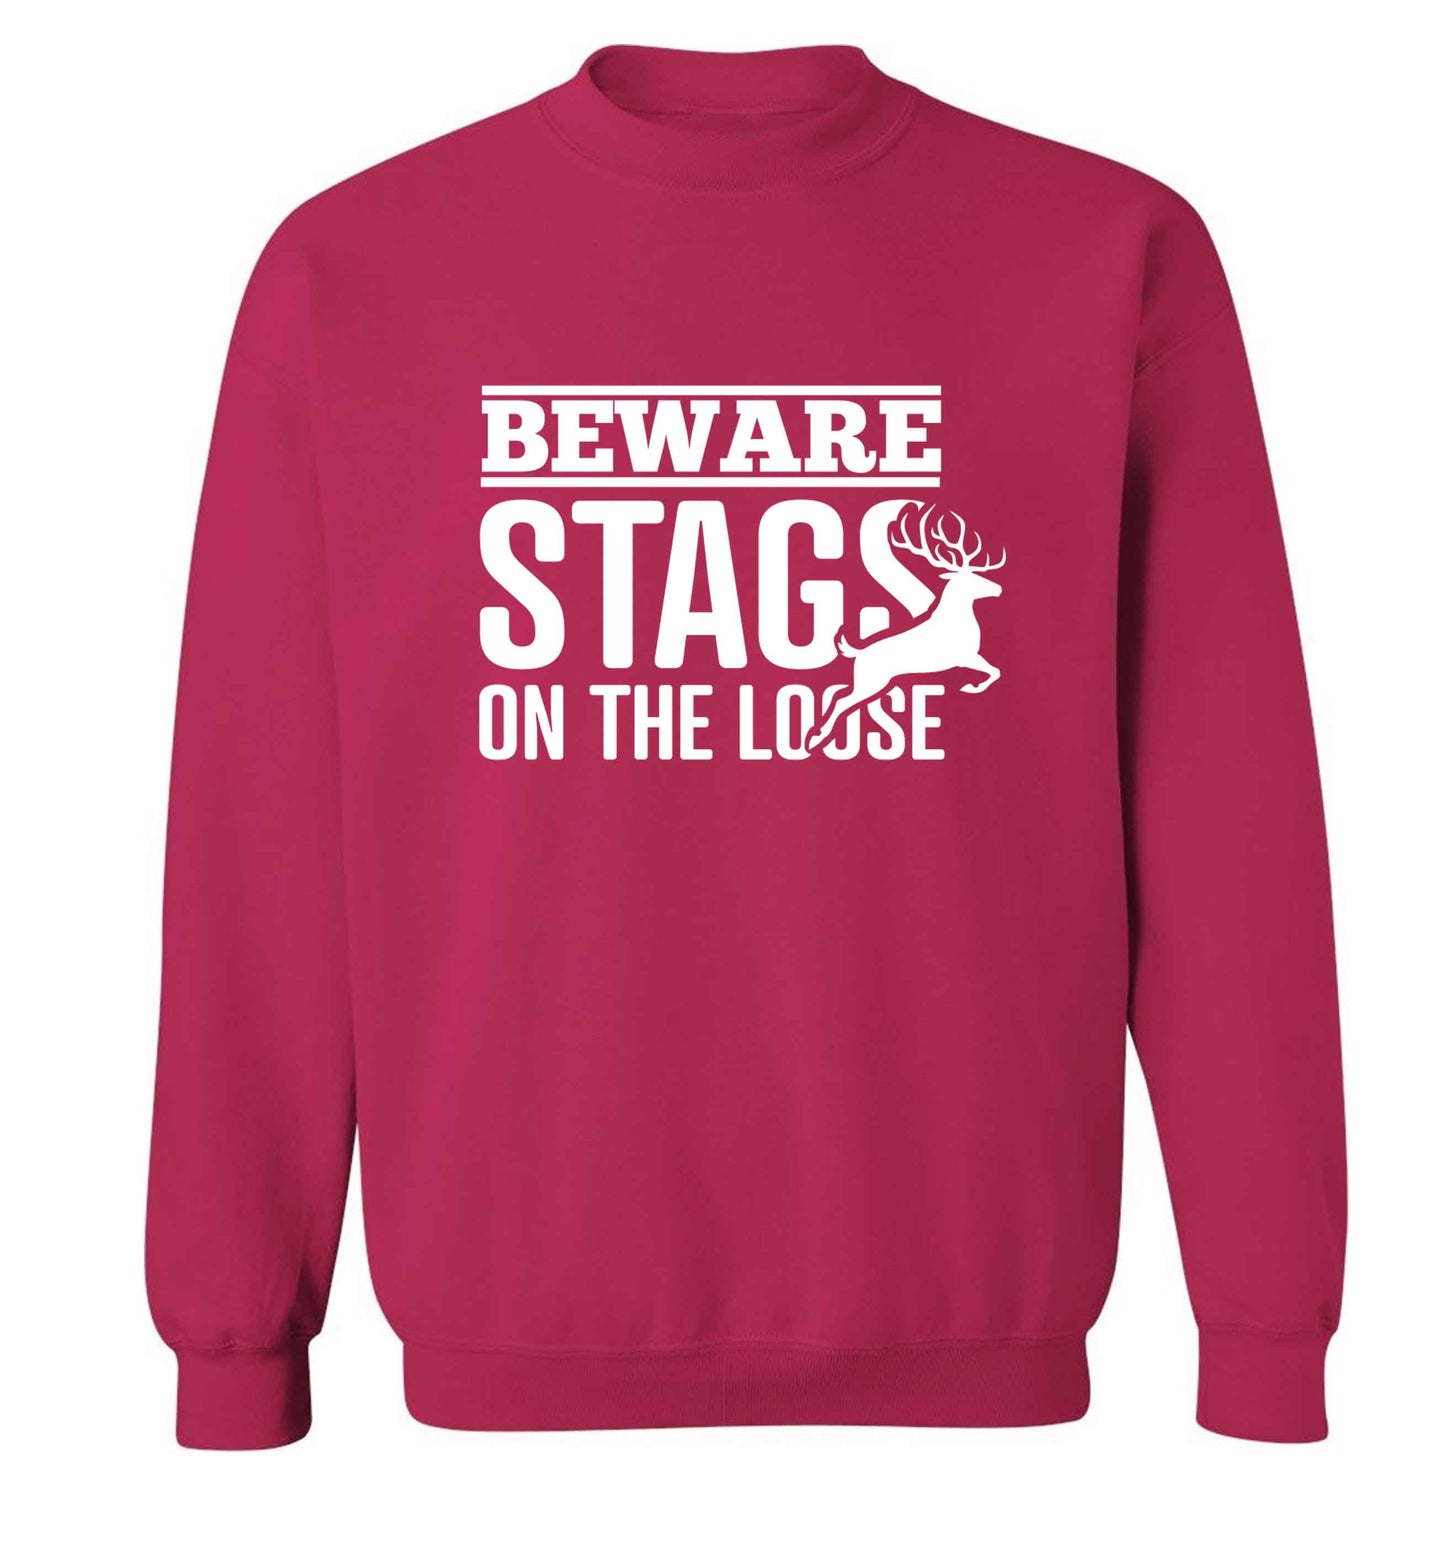 Beware stags on the loose adult's unisex pink sweater 2XL